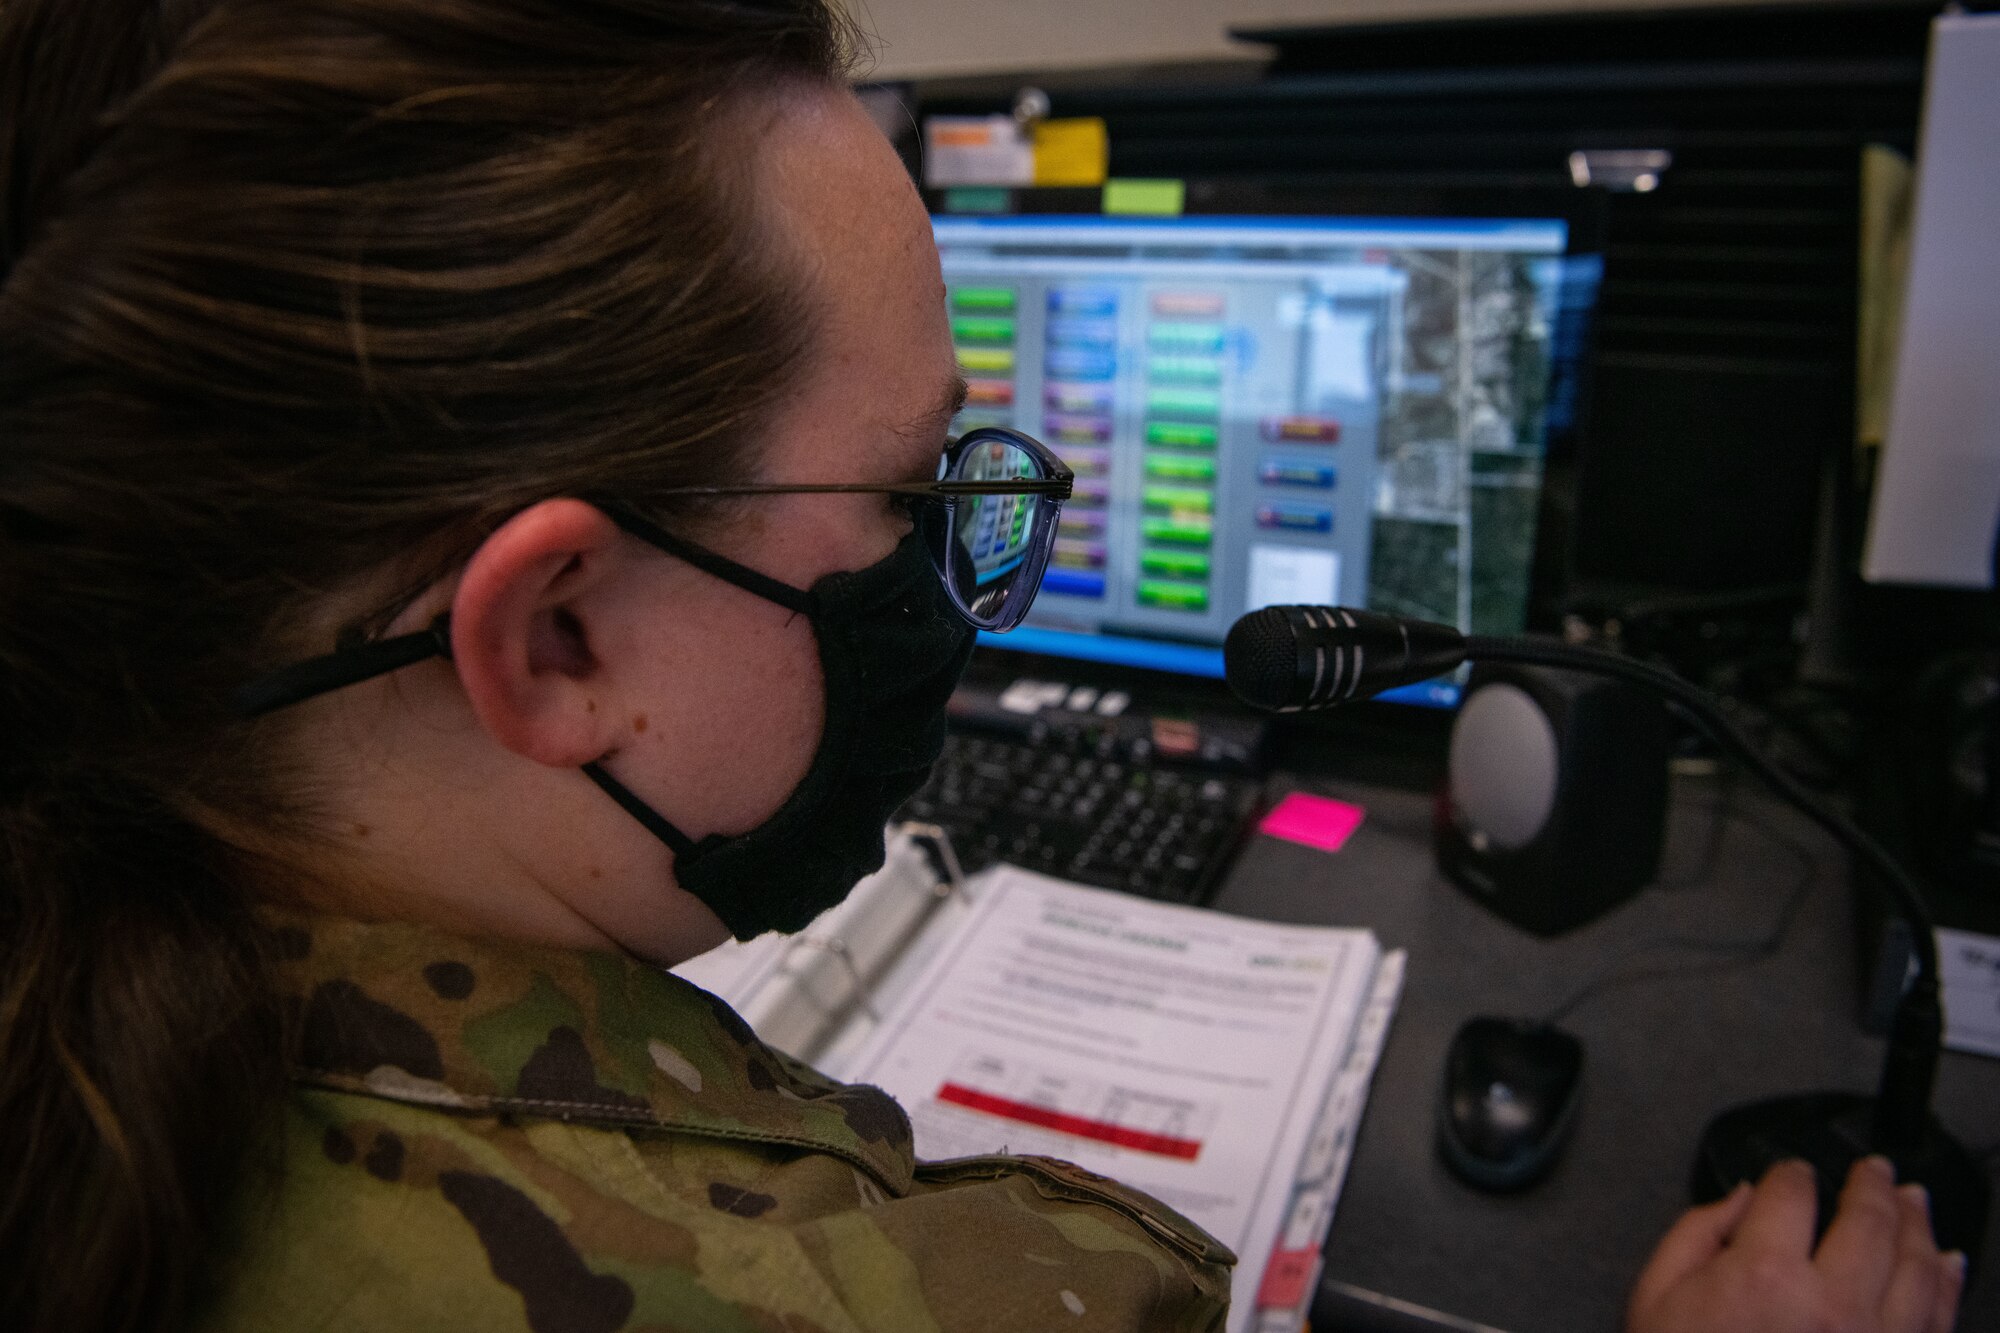 Female Airman speaks into microphone on desk with screens in background.